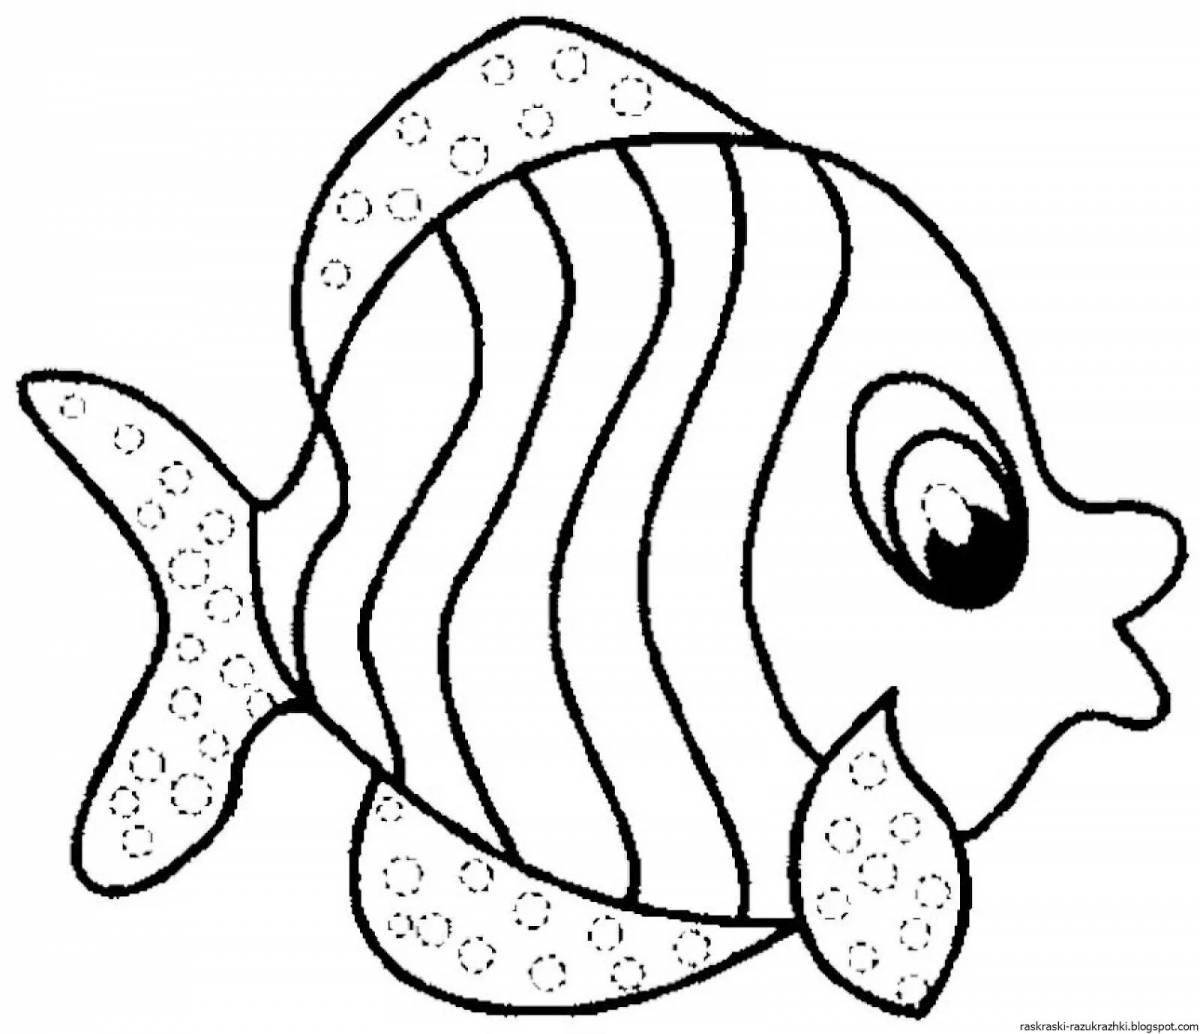 Adorable fish coloring book for 2-3 year olds